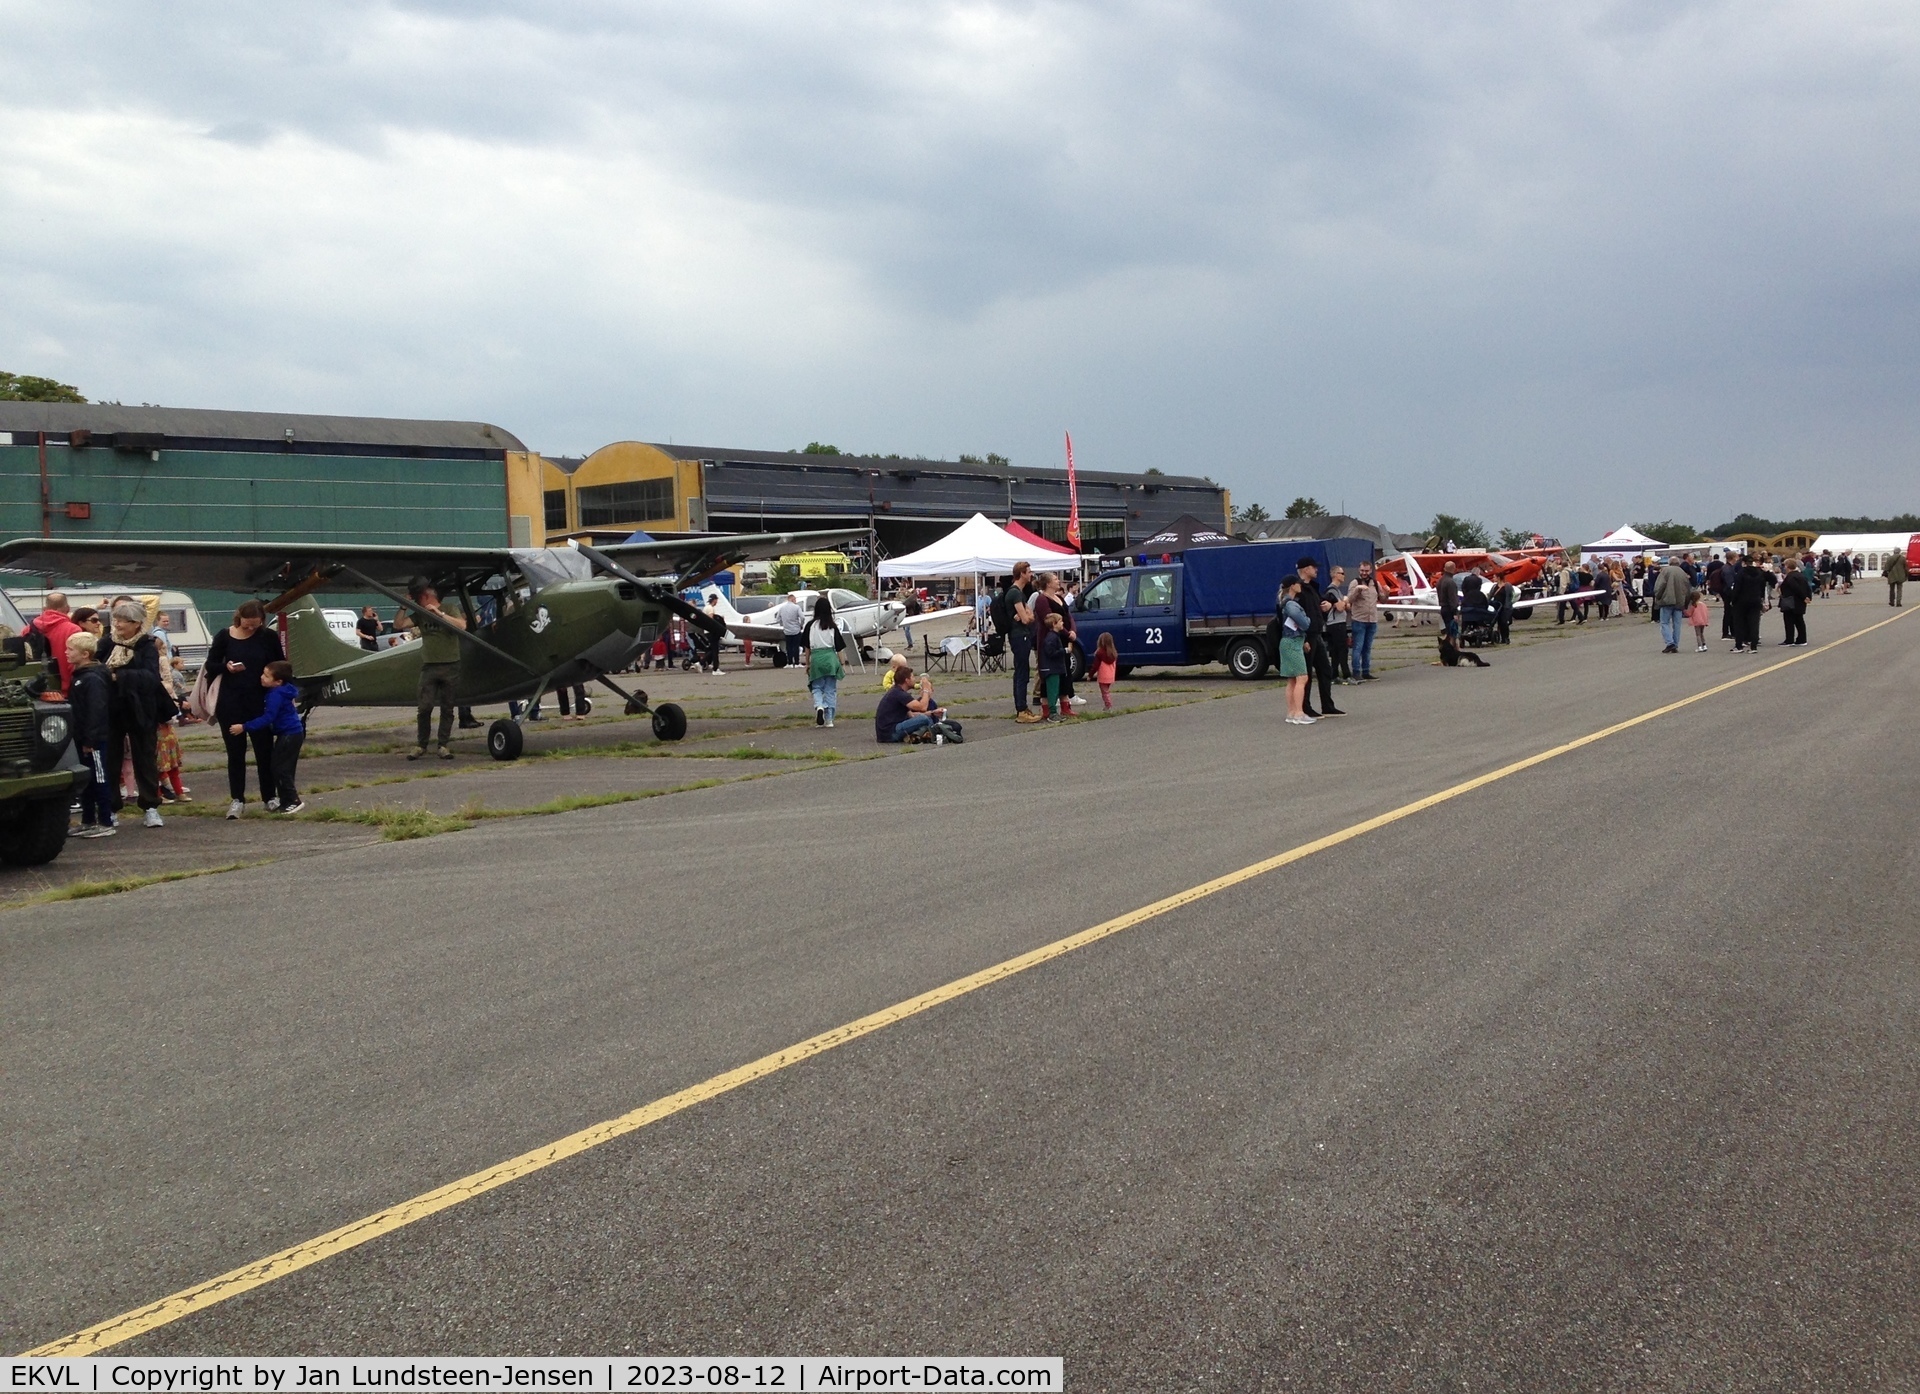 EKVL Airport - An airshow at the former Vaerloese Air Base in Denmark. To the left Cessna Bird Dog OY-WIL. Hangars 1 and 2 in the background.